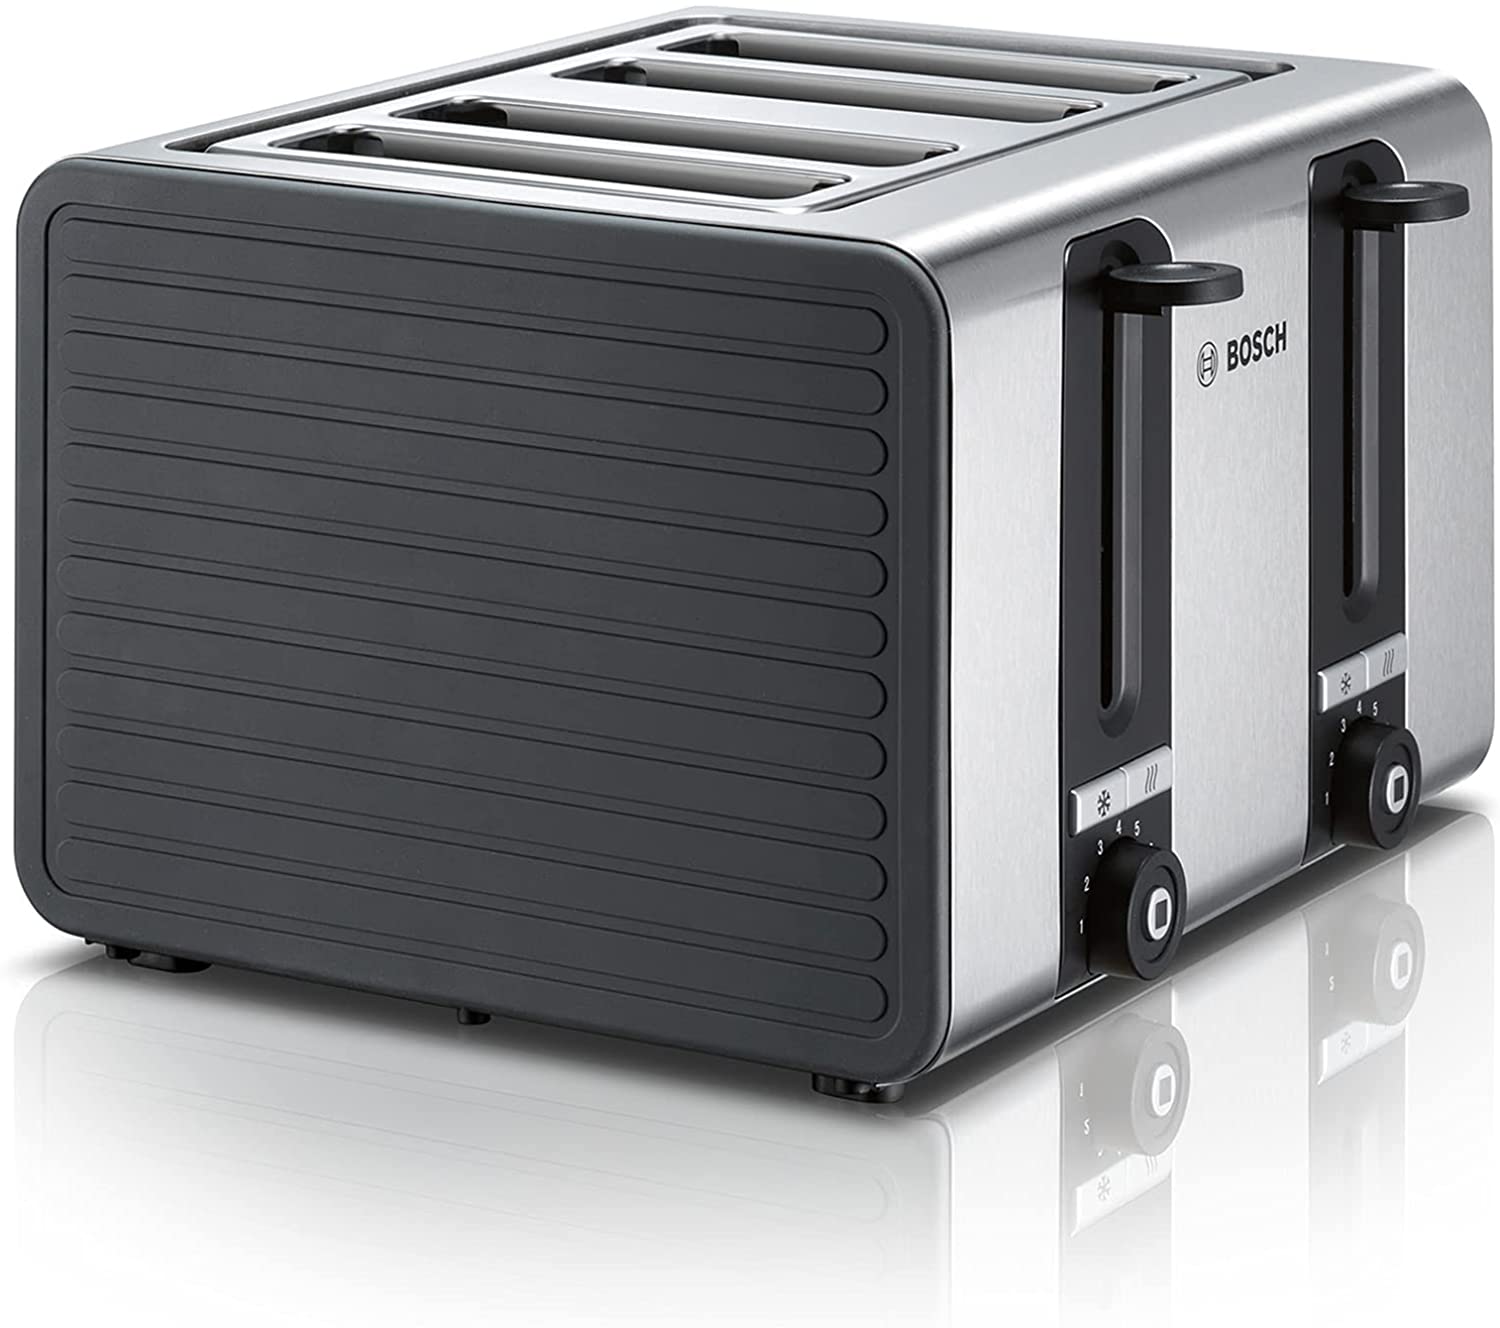 Bosch TAT7S45 4-Slot Toaster with Automatic Shut-Off, with Defrosting Function, Ideal for 4 Slice Toast, Wide, Lift Function, 1800 W, Stainless Steel/Grey